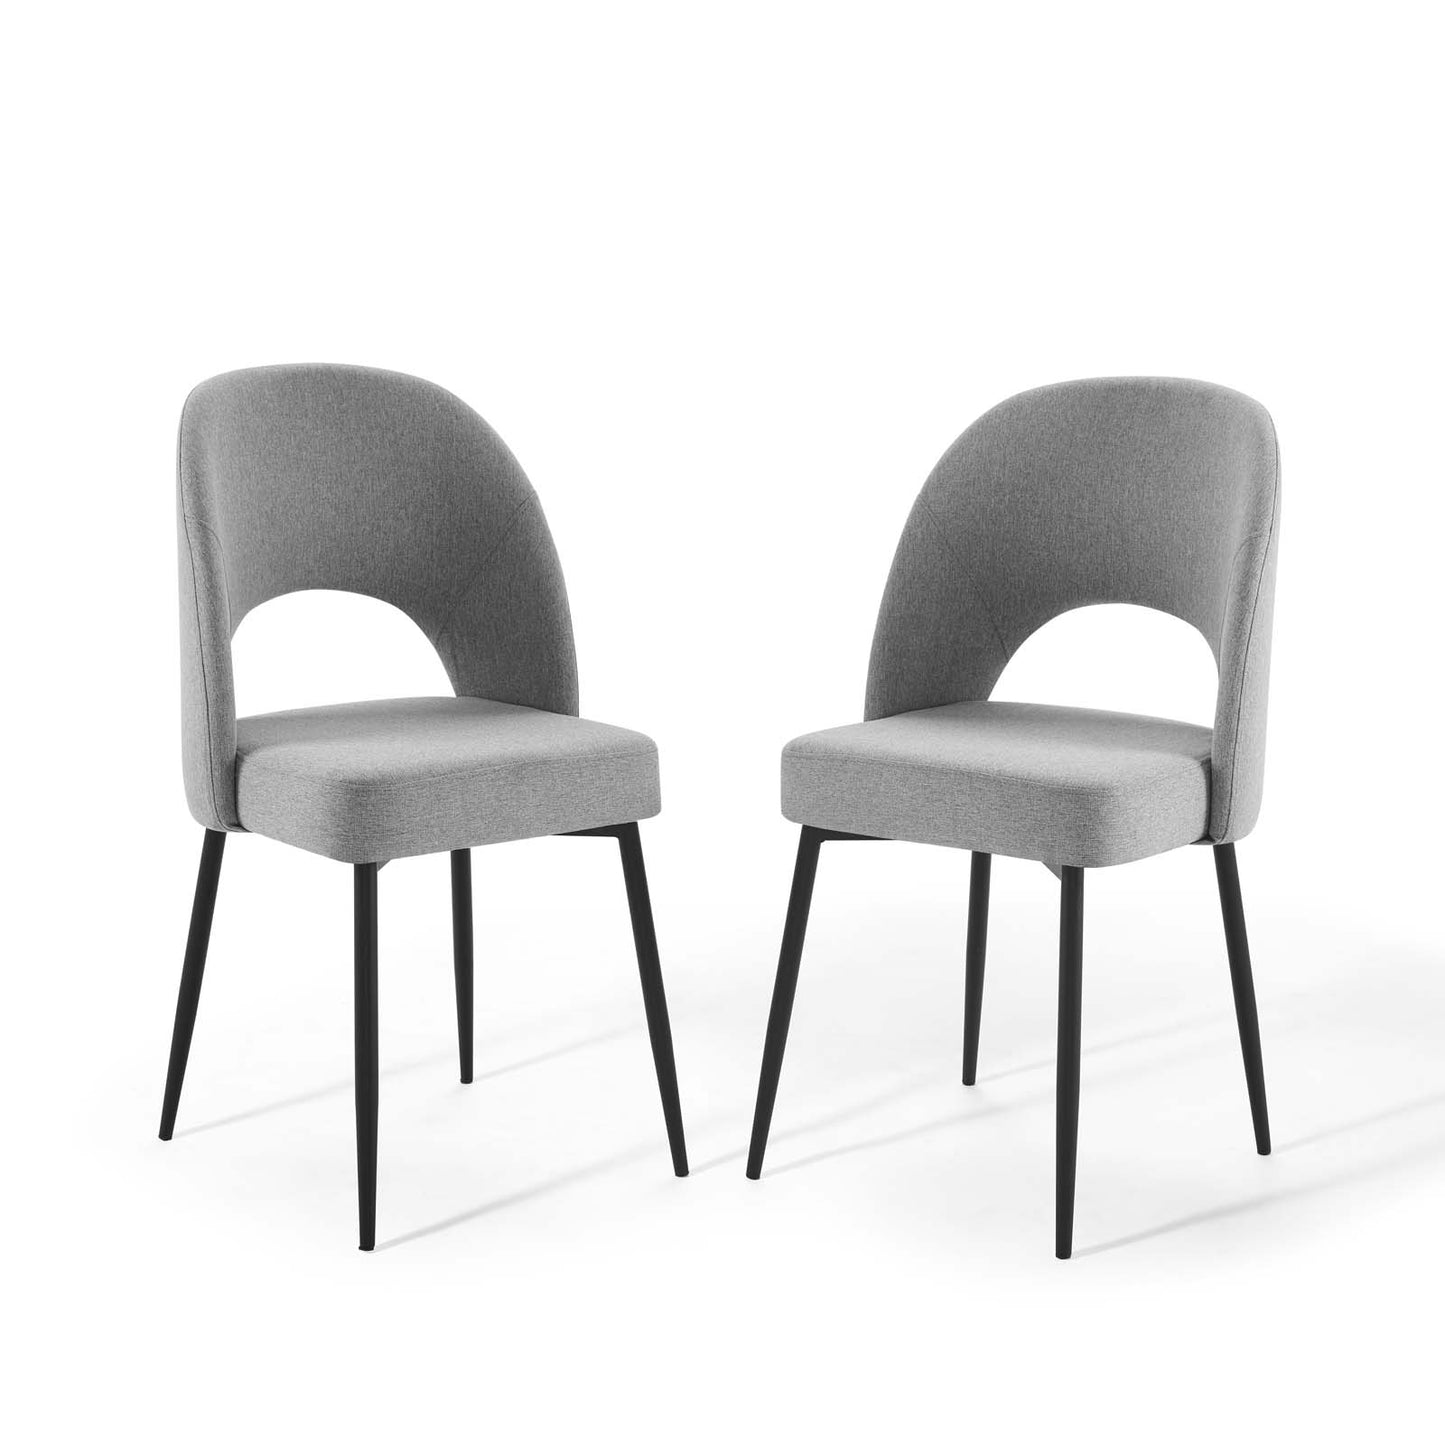 Rouse Dining Side Chair Upholstered Fabric Set of 2 Black Light Gray EEI-4490-BLK-LGR